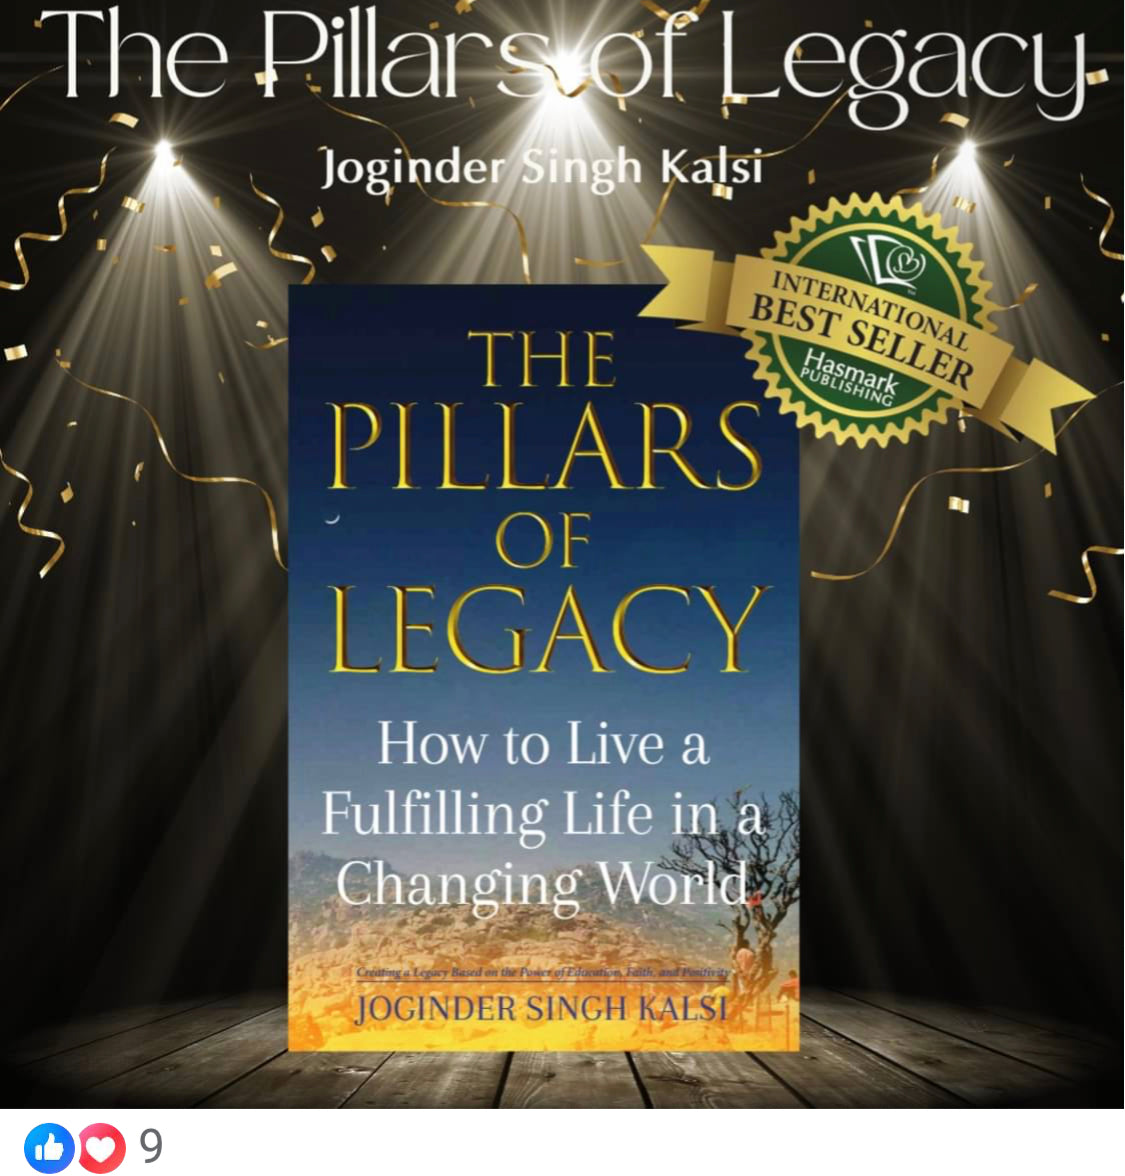 Book: The Pillars of Legacy